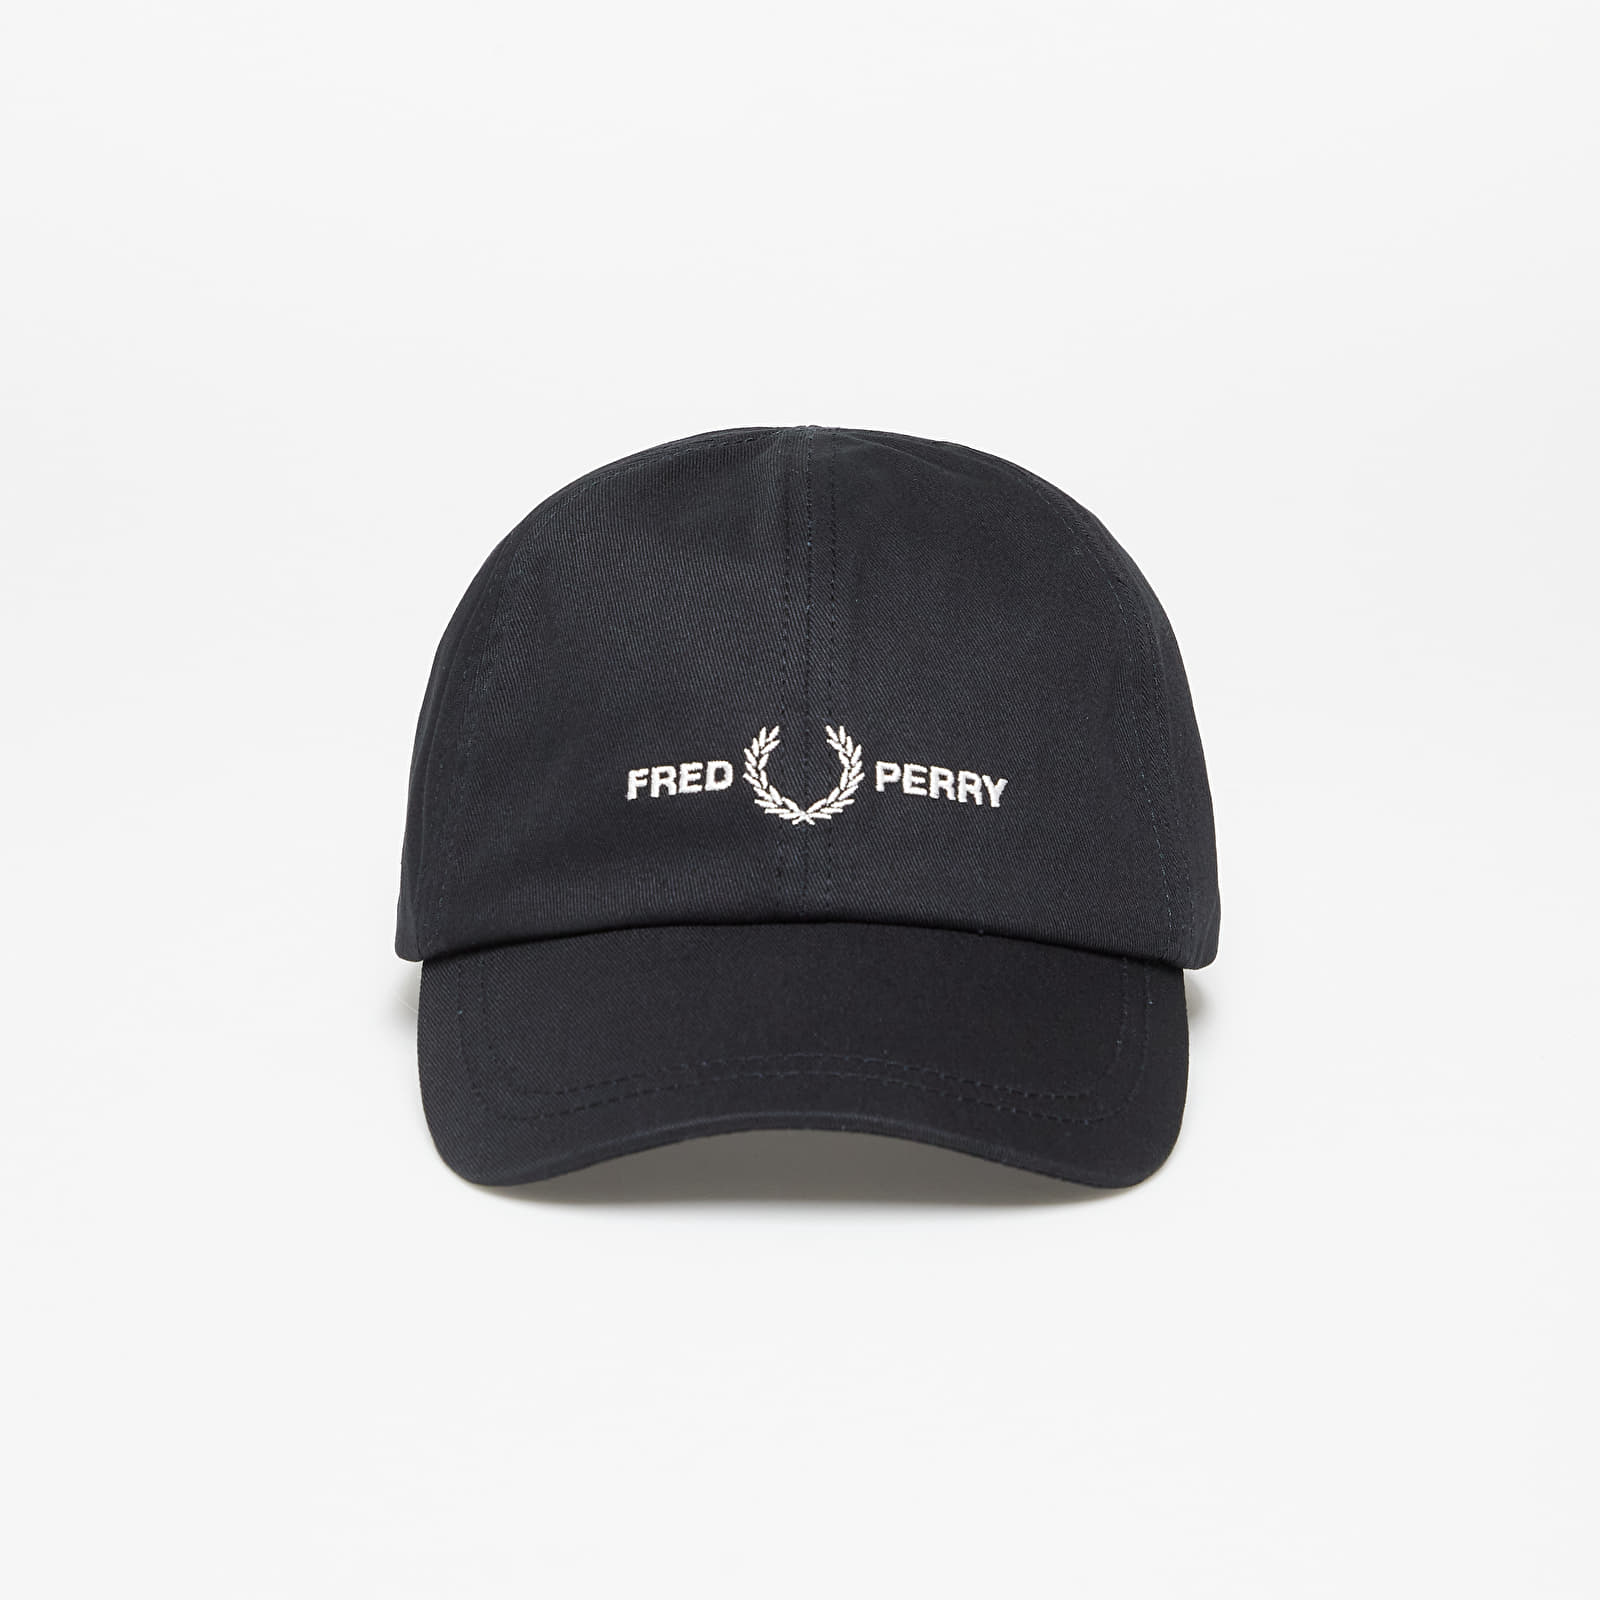 Kšiltovky FRED PERRY Graphic Branding Twill Cap Black